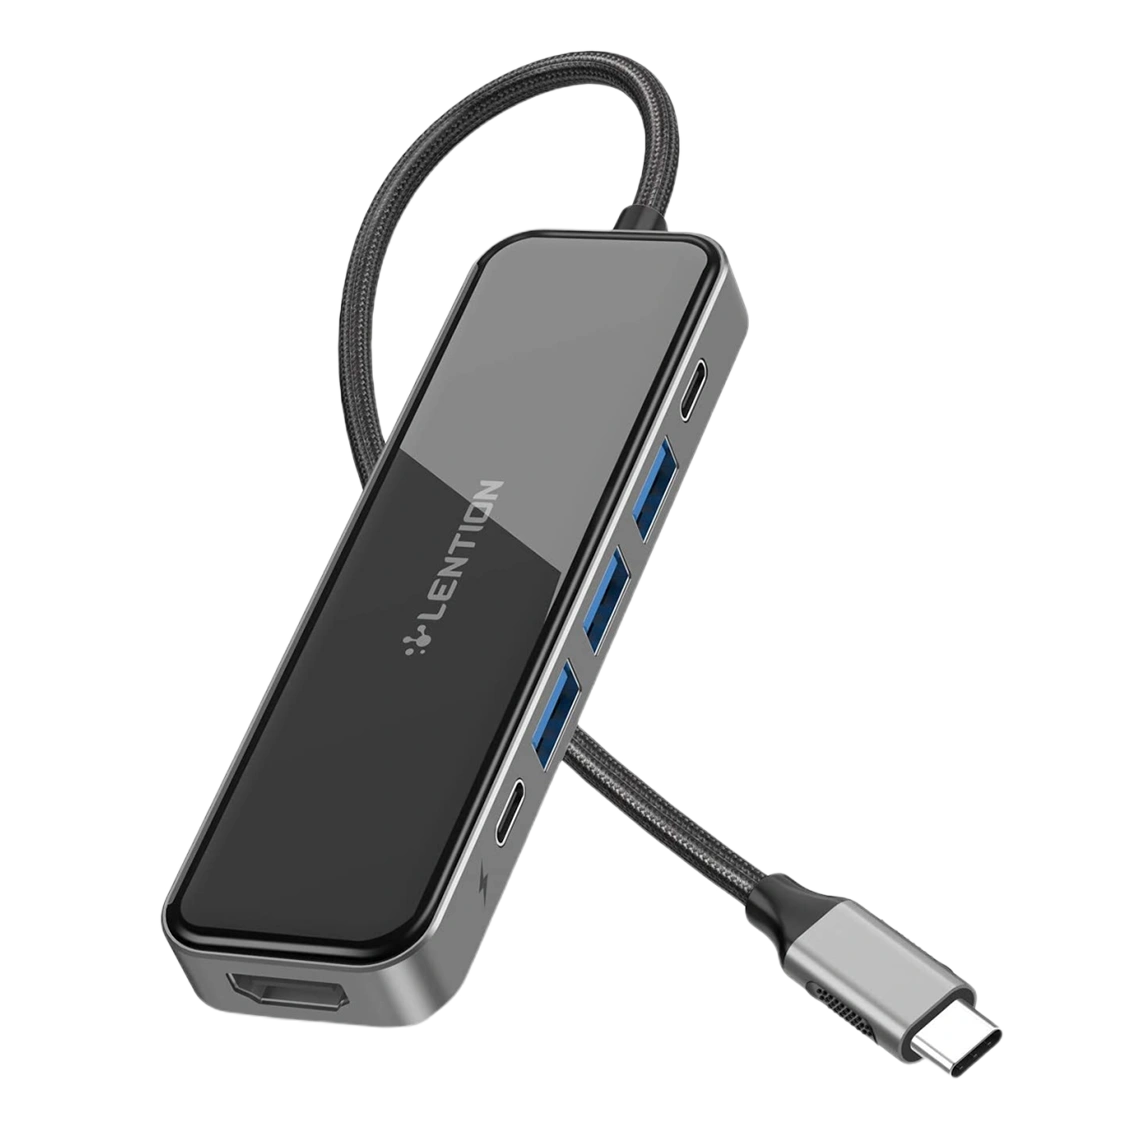 Lention USB-C to HDMI, USB 3.0 and USB-C CE35